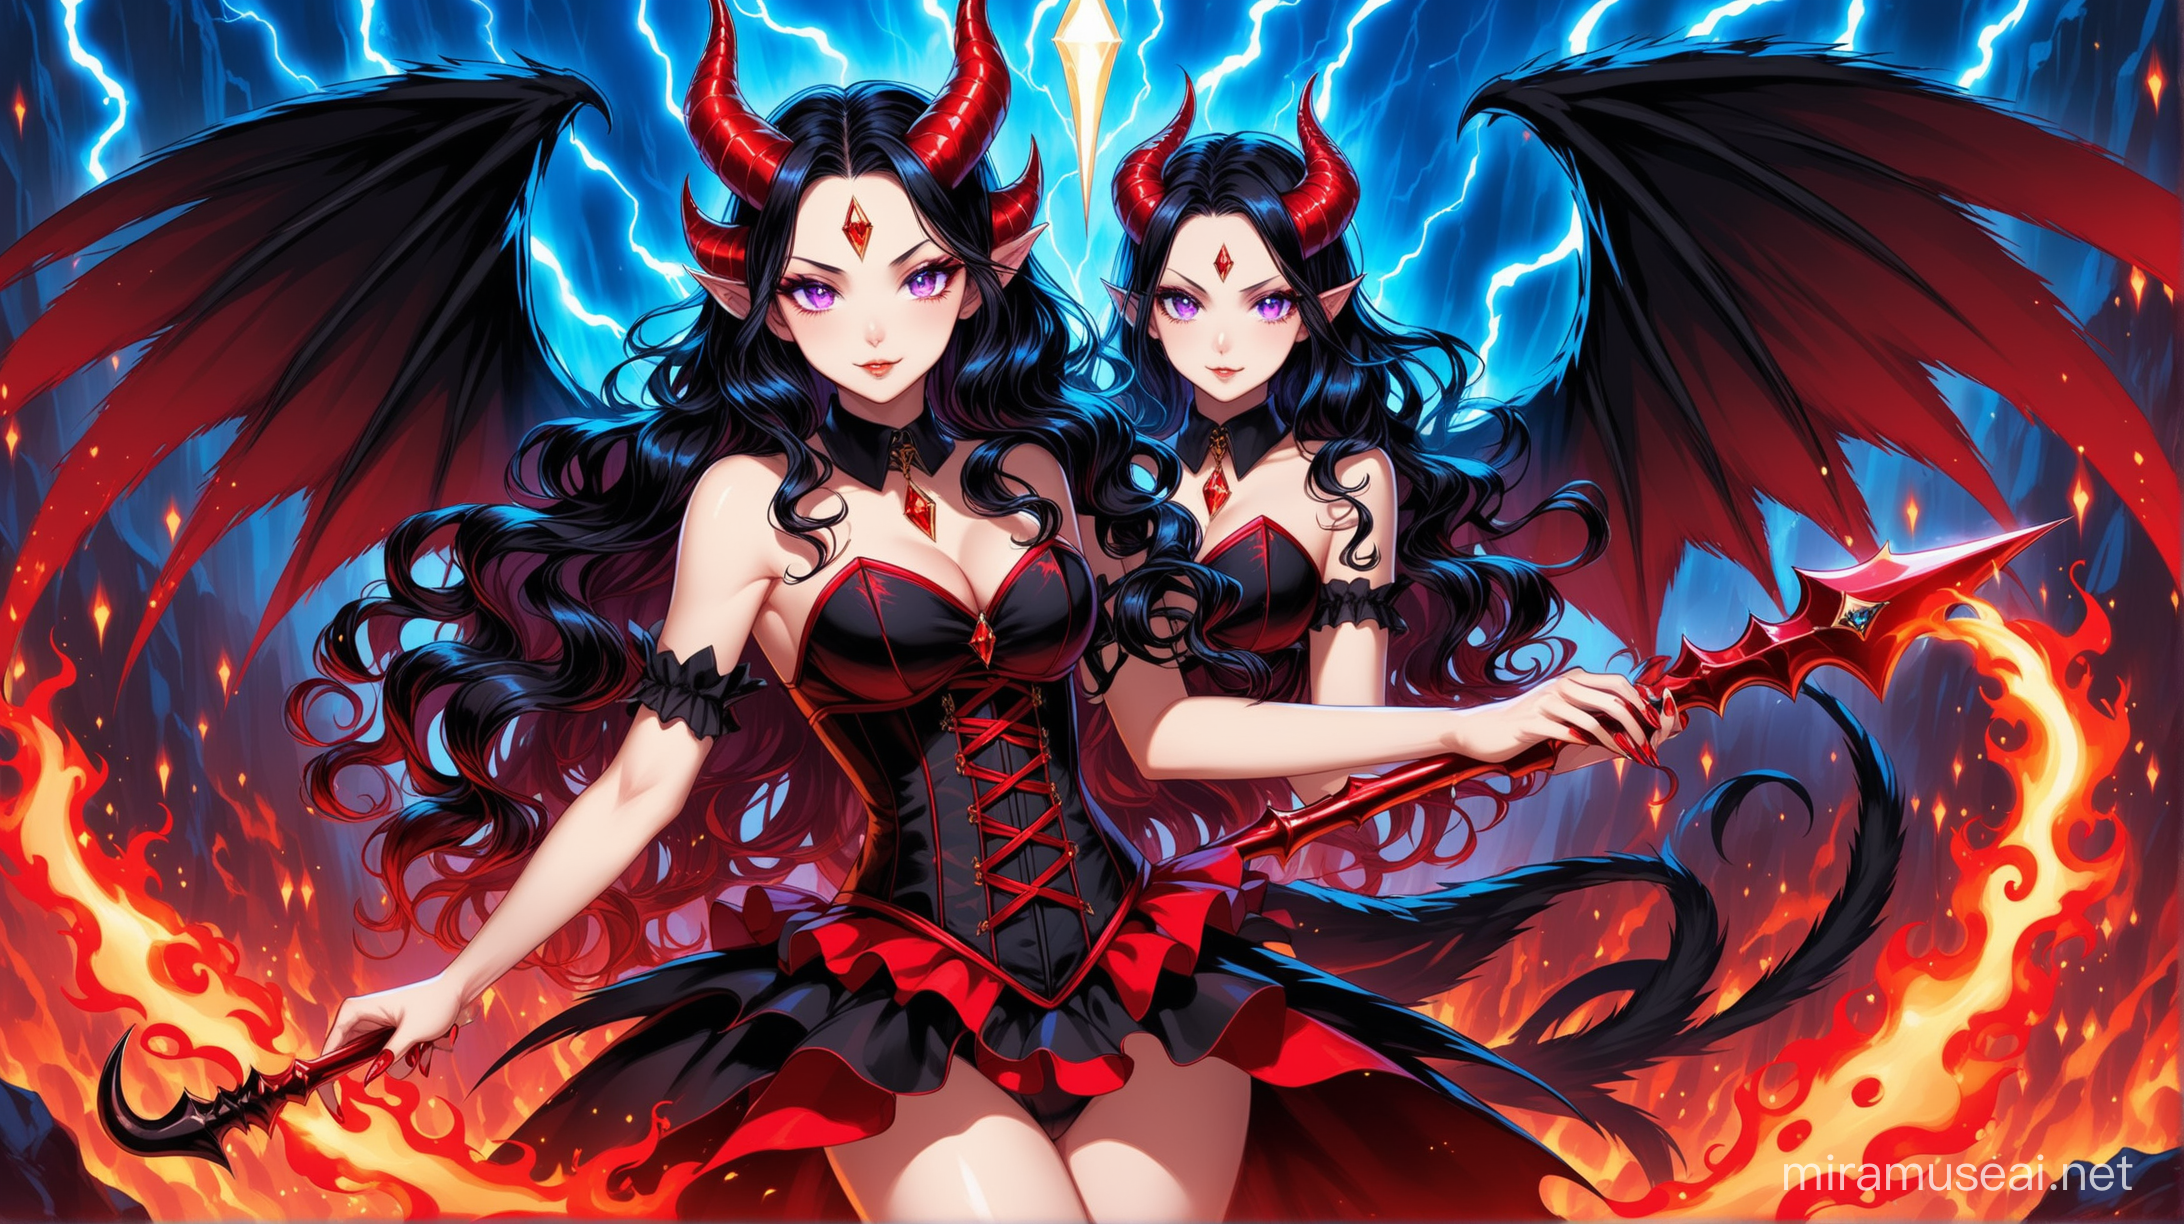 female devil with horns, a spade tail, long nails, large black wings with fair skin, violet eyes, long curly strawberry blade & black hair wearing a corset surrounded by red flames & blue lightning with a ruby diamond in her forehead posing